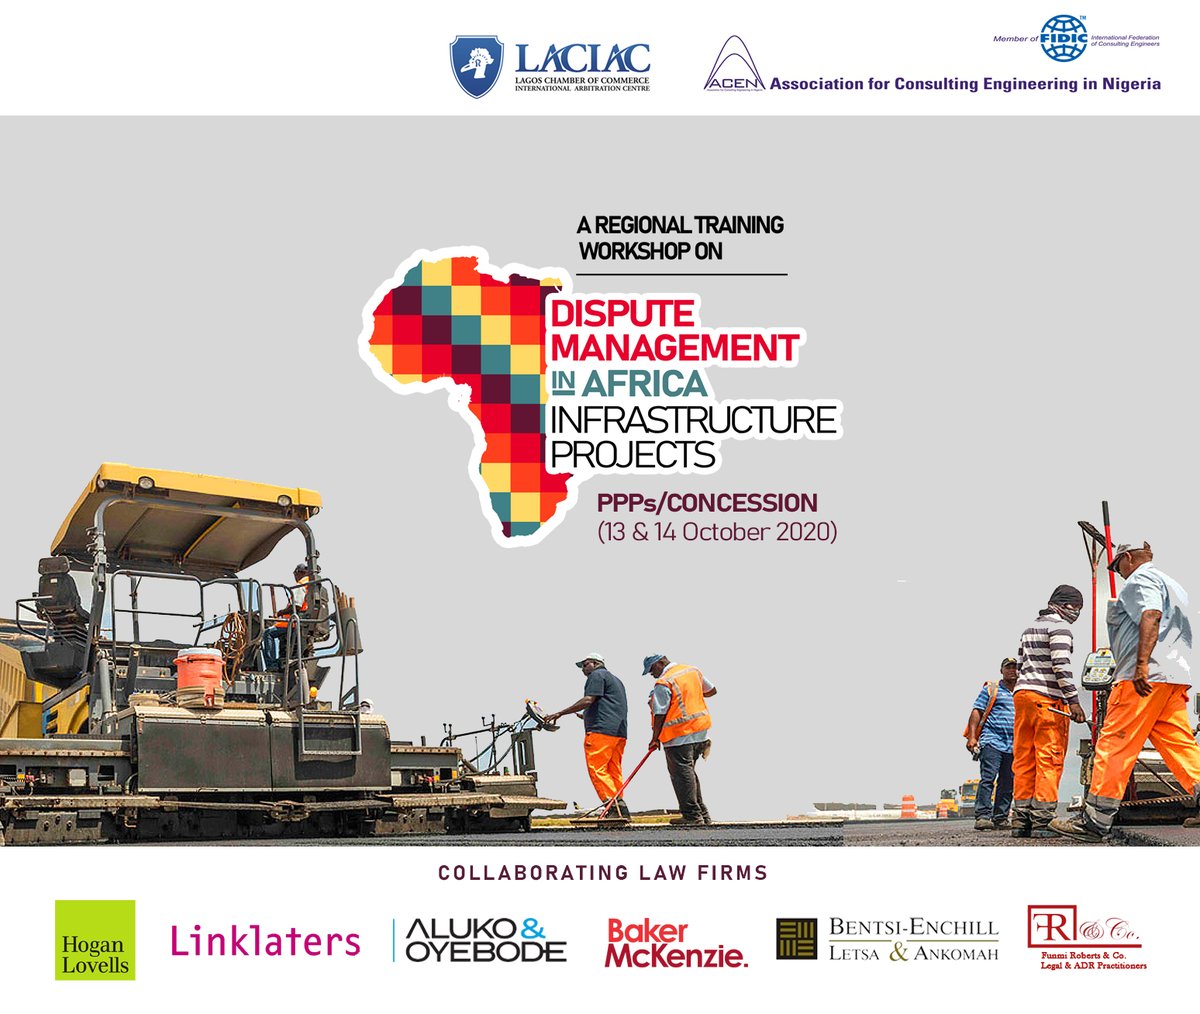 Join us for week 2 of the Regional Training Workshop on #DisputeManagement in #Africa #Infrastructure Projects.

🗒️Topic: #PublicInfrastructure/#PPP/#Concession
📅Date: 13 & 14 October 2020
📒Agenda: bit.ly/3701Kn0.
🌍Register: bit.ly/2SPaZhH.

#DiMAP2020 #DiMAP